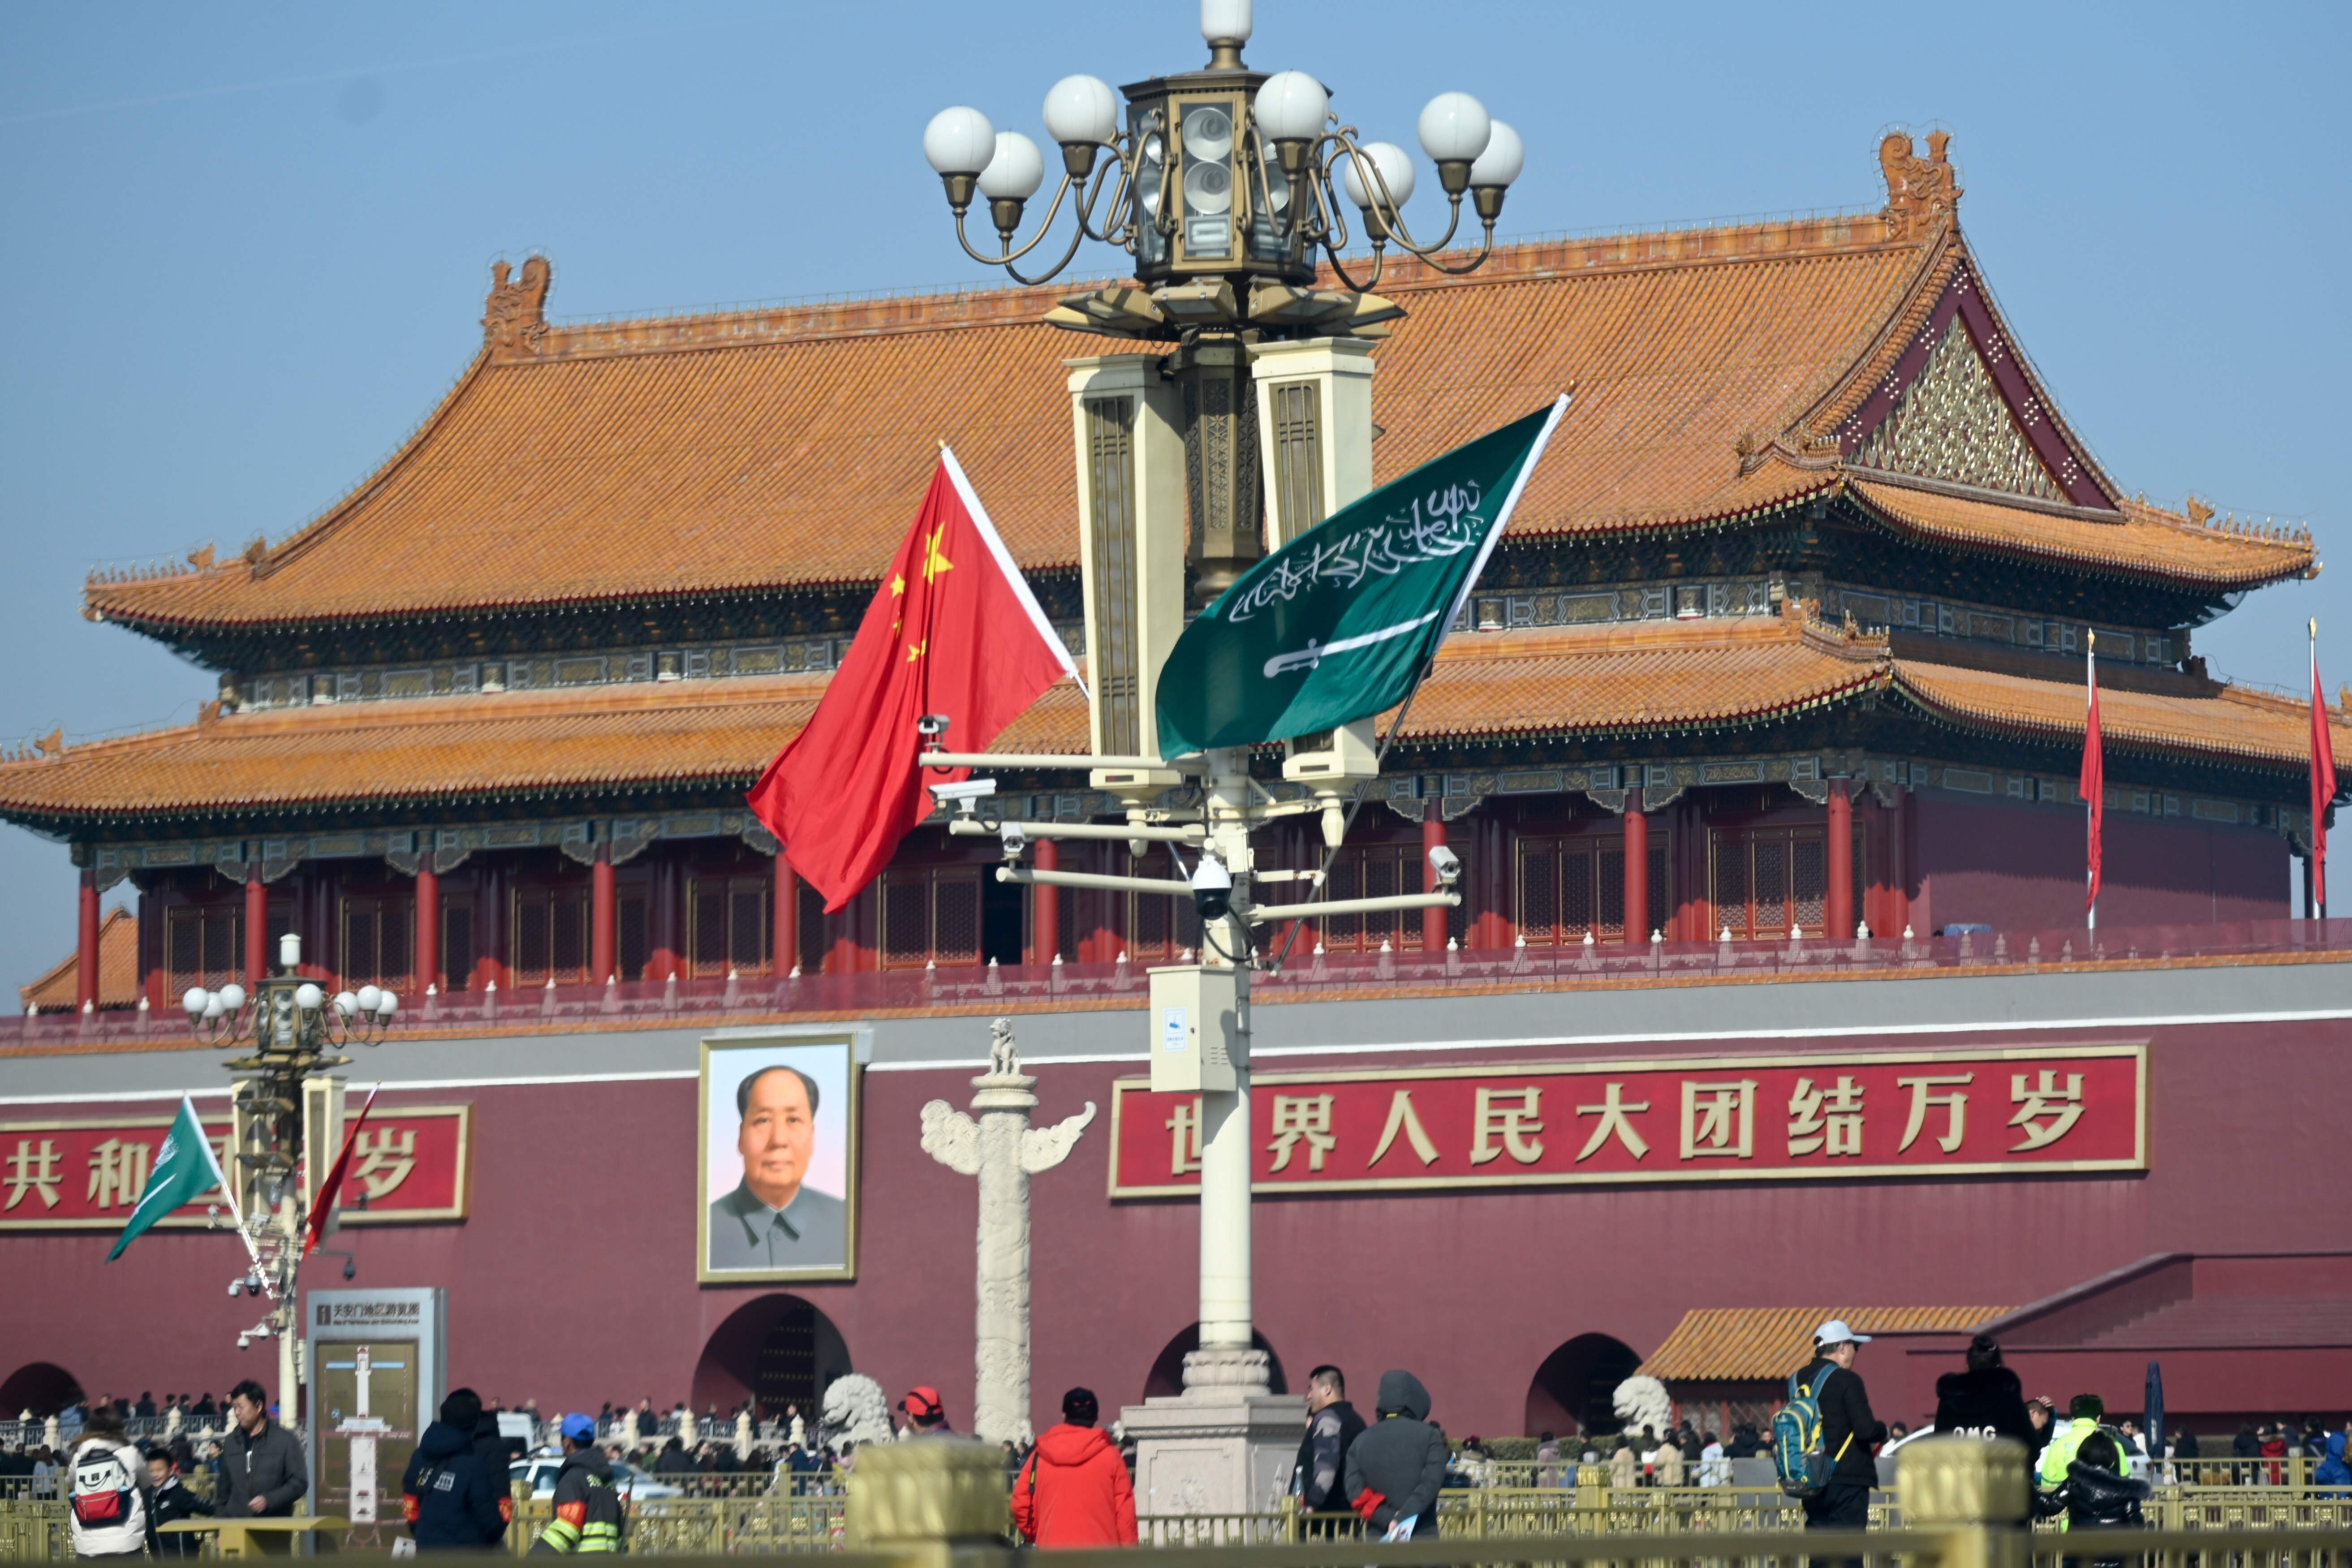 The national flags of China and Saudi Arabia are displayed at Tiananmen Square in Beijing on February 21, 2019. As the United States becomes more isolationist, Middle Eastern countries are expanding their horizons and seeking strategic partnerships with other countries, including China. Photo: AFP